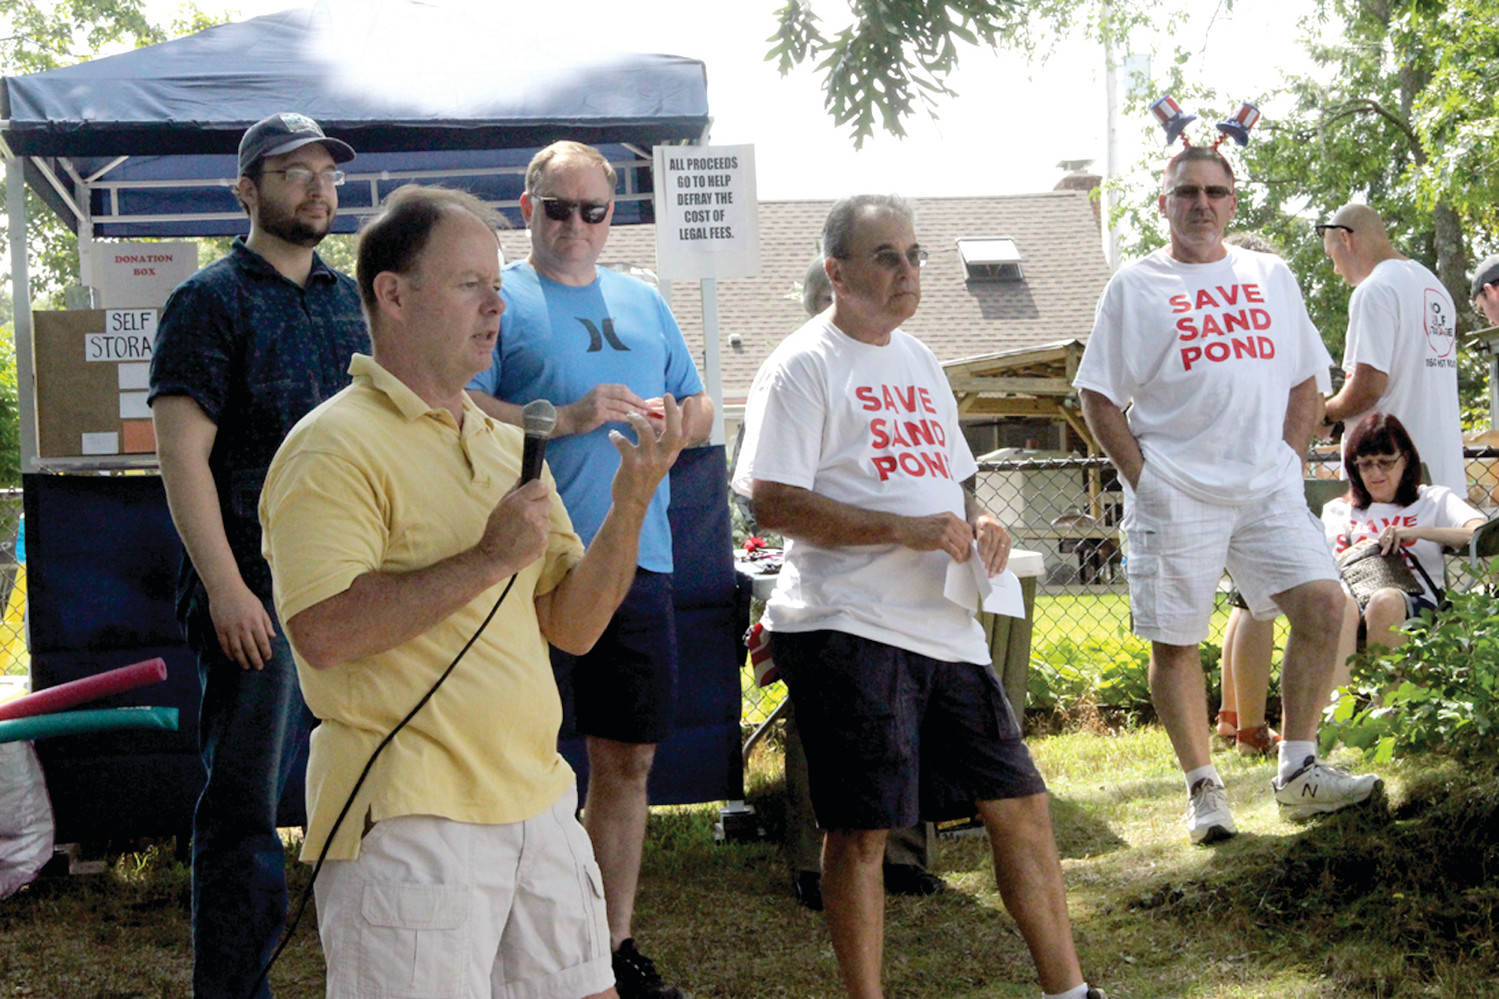 COMMITTED TO FIGHT PLAN: Norwood resident James Desmaris called on neighbors to carry forward their fight against a self-storage unit at Sand Pond Plaza. Looking on are David Bouchard, emcee at Saturday’s Pond Palozza, and Mayor Joseph Solomon.